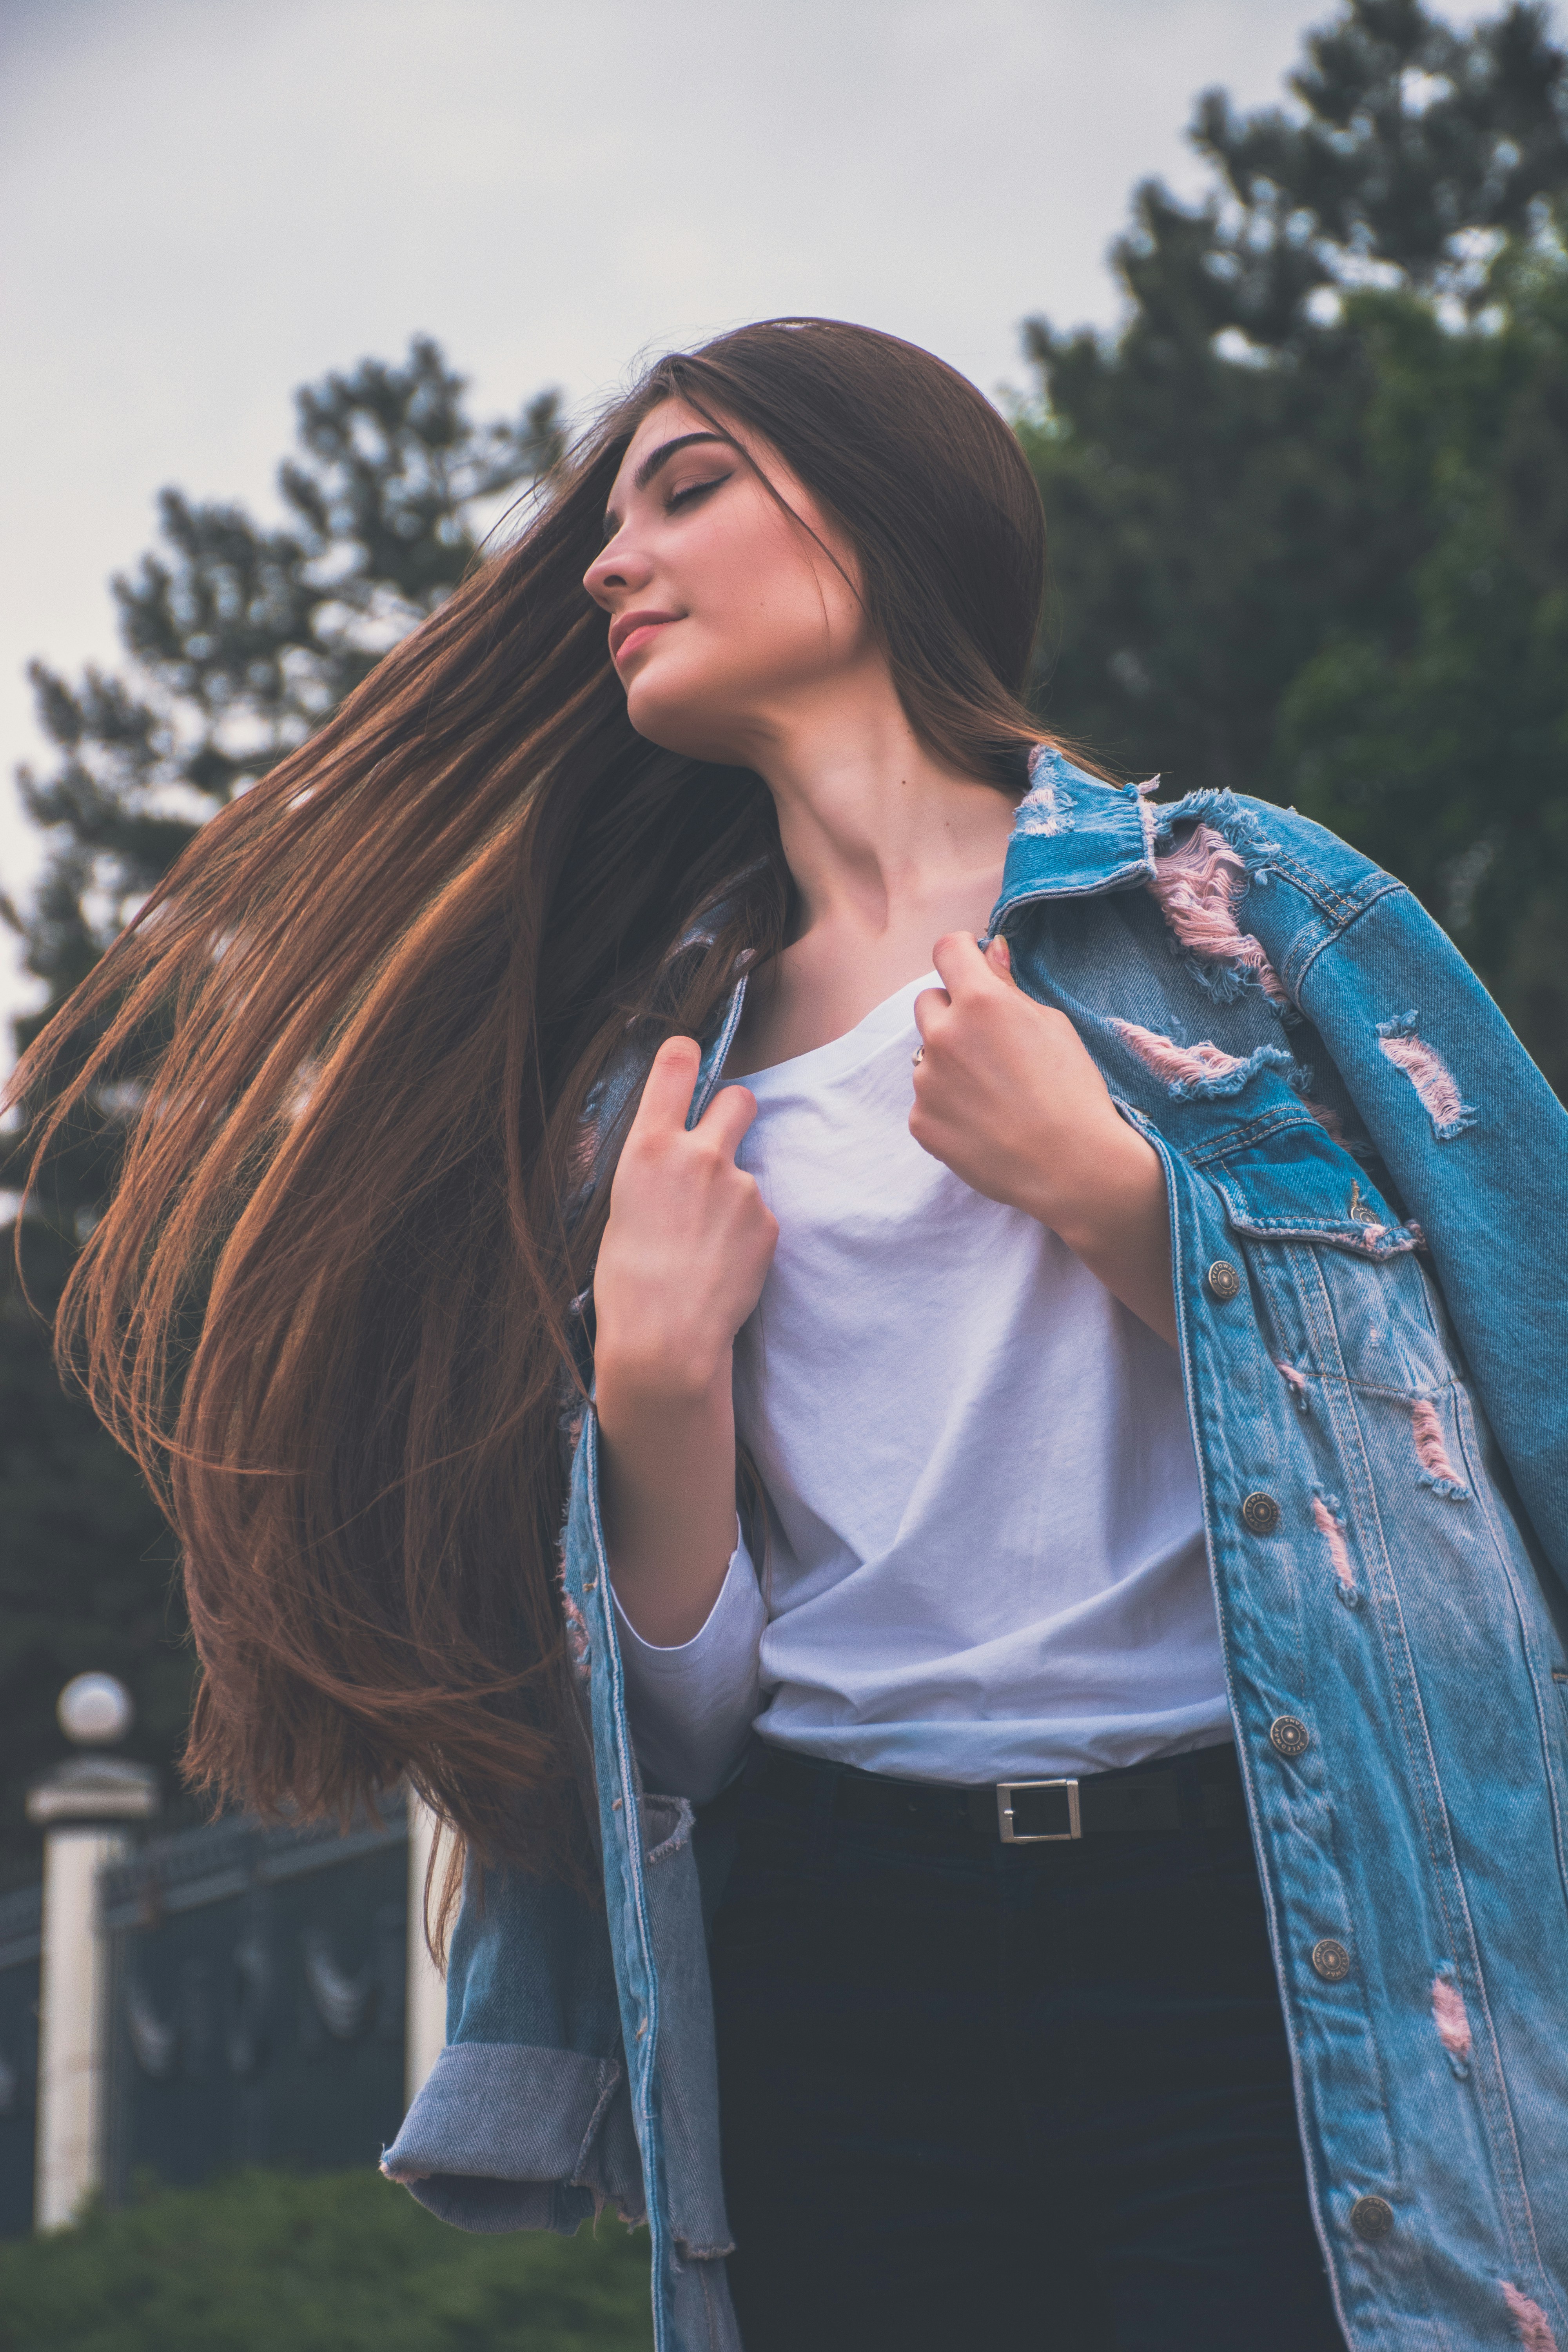 a woman with long hair wearing a denim jacket